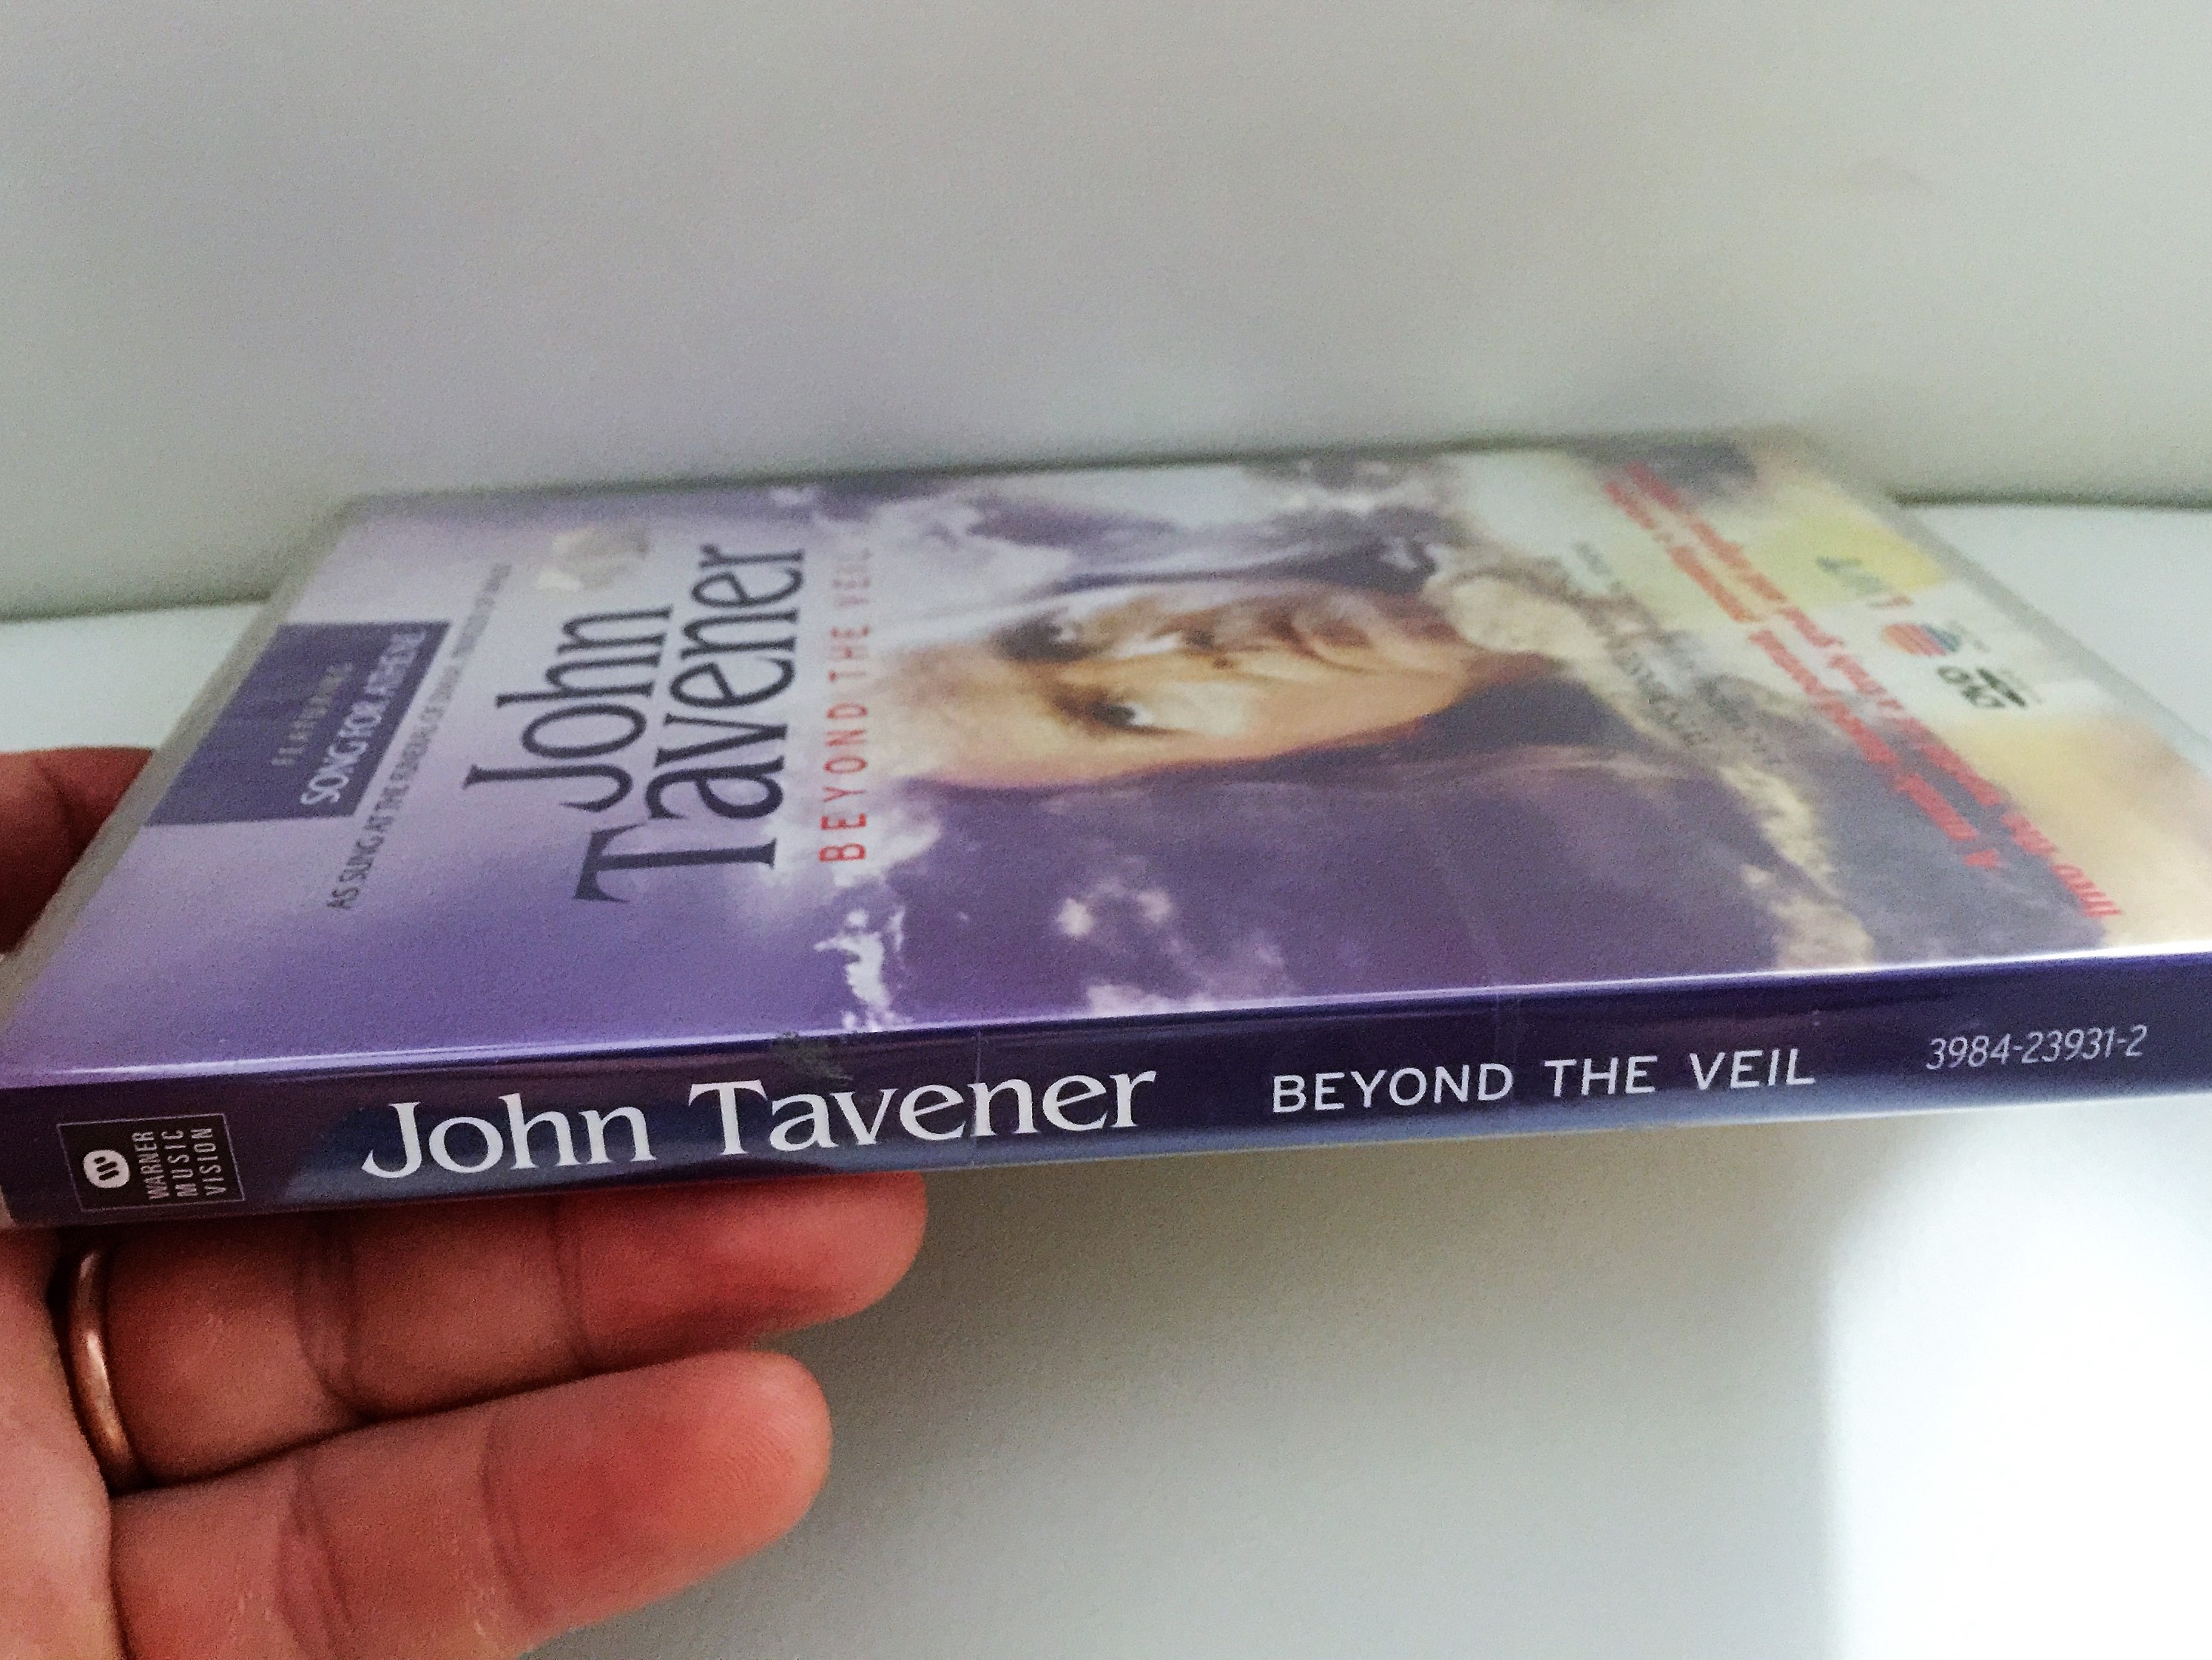 John Tavener - Beyond the Veil DVD 1998 Featuring Song for Athene 1